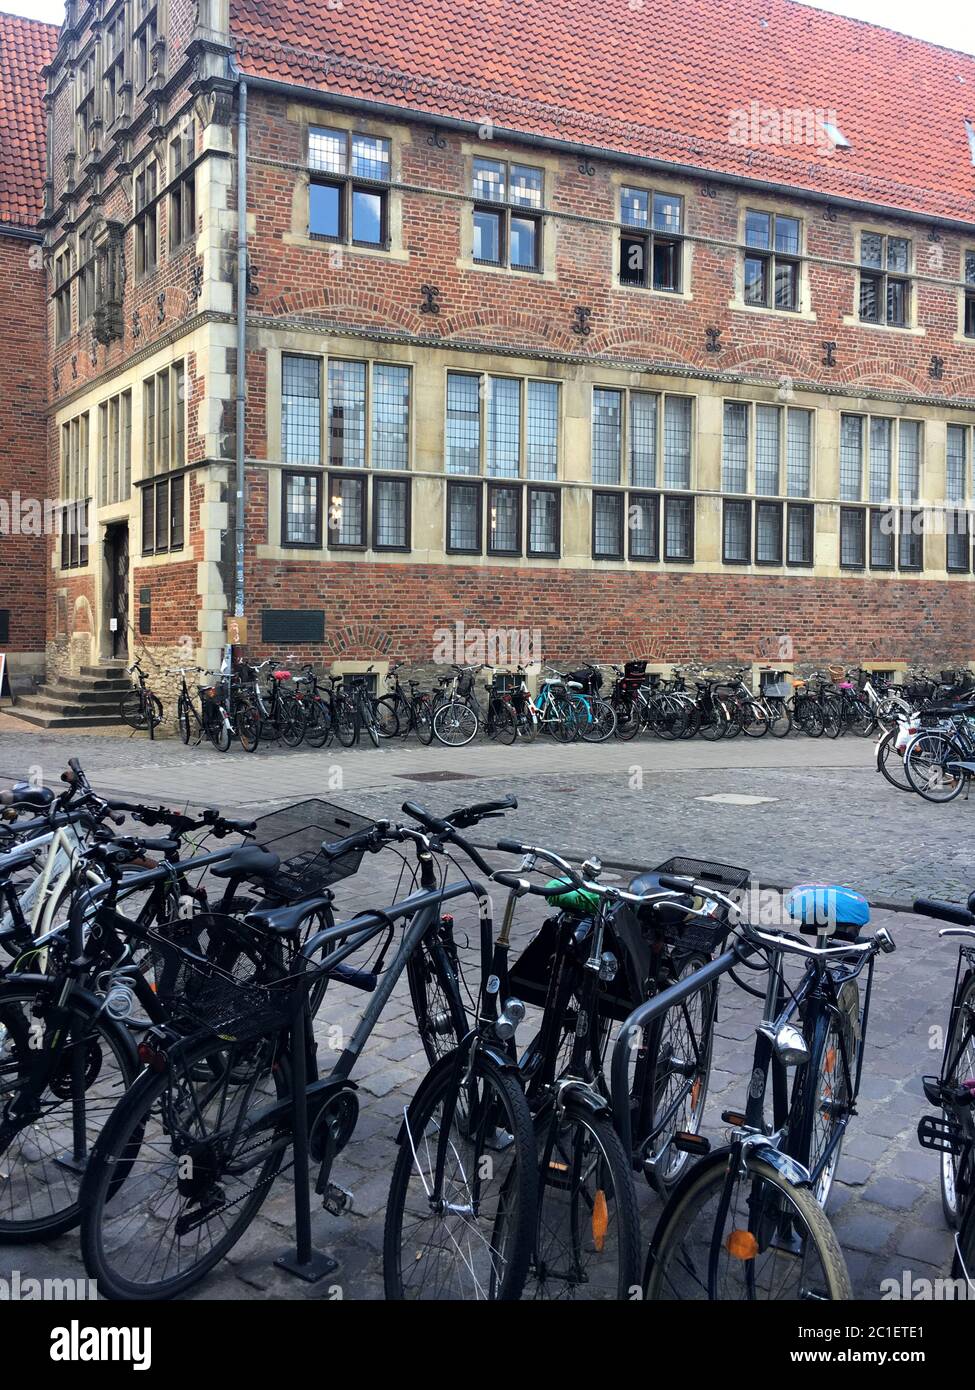 The old guild house and WWU building Haus der Niederlande/ Krameramtshaus in Muenster, Germany with many bicycles parked in front. Stock Photo